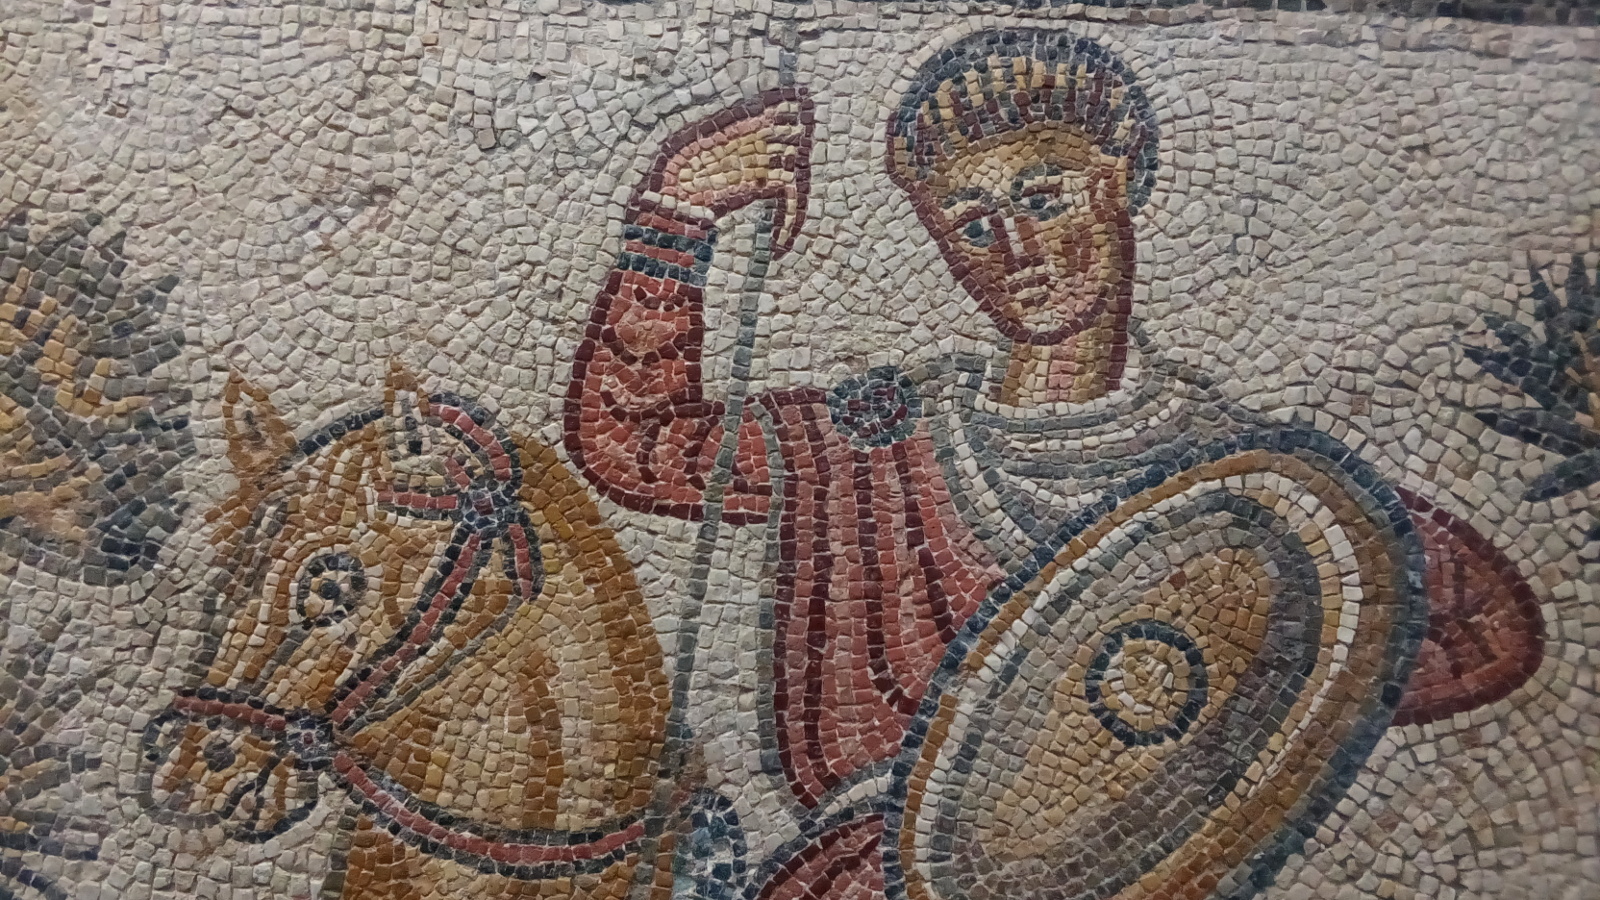 Mosaic from the Museum of Roman art.